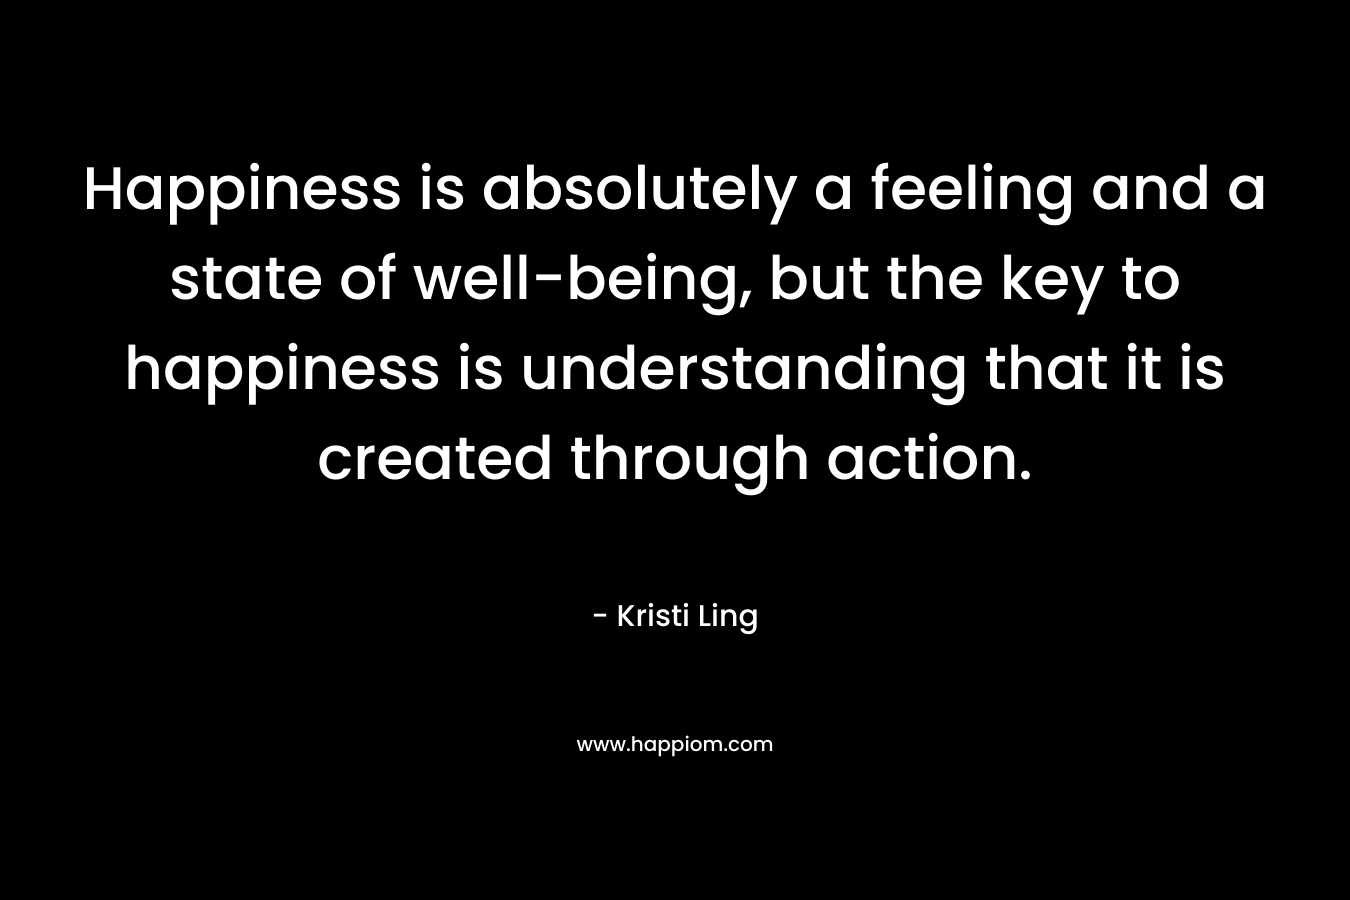 Happiness is absolutely a feeling and a state of well-being, but the key to happiness is understanding that it is created through action.